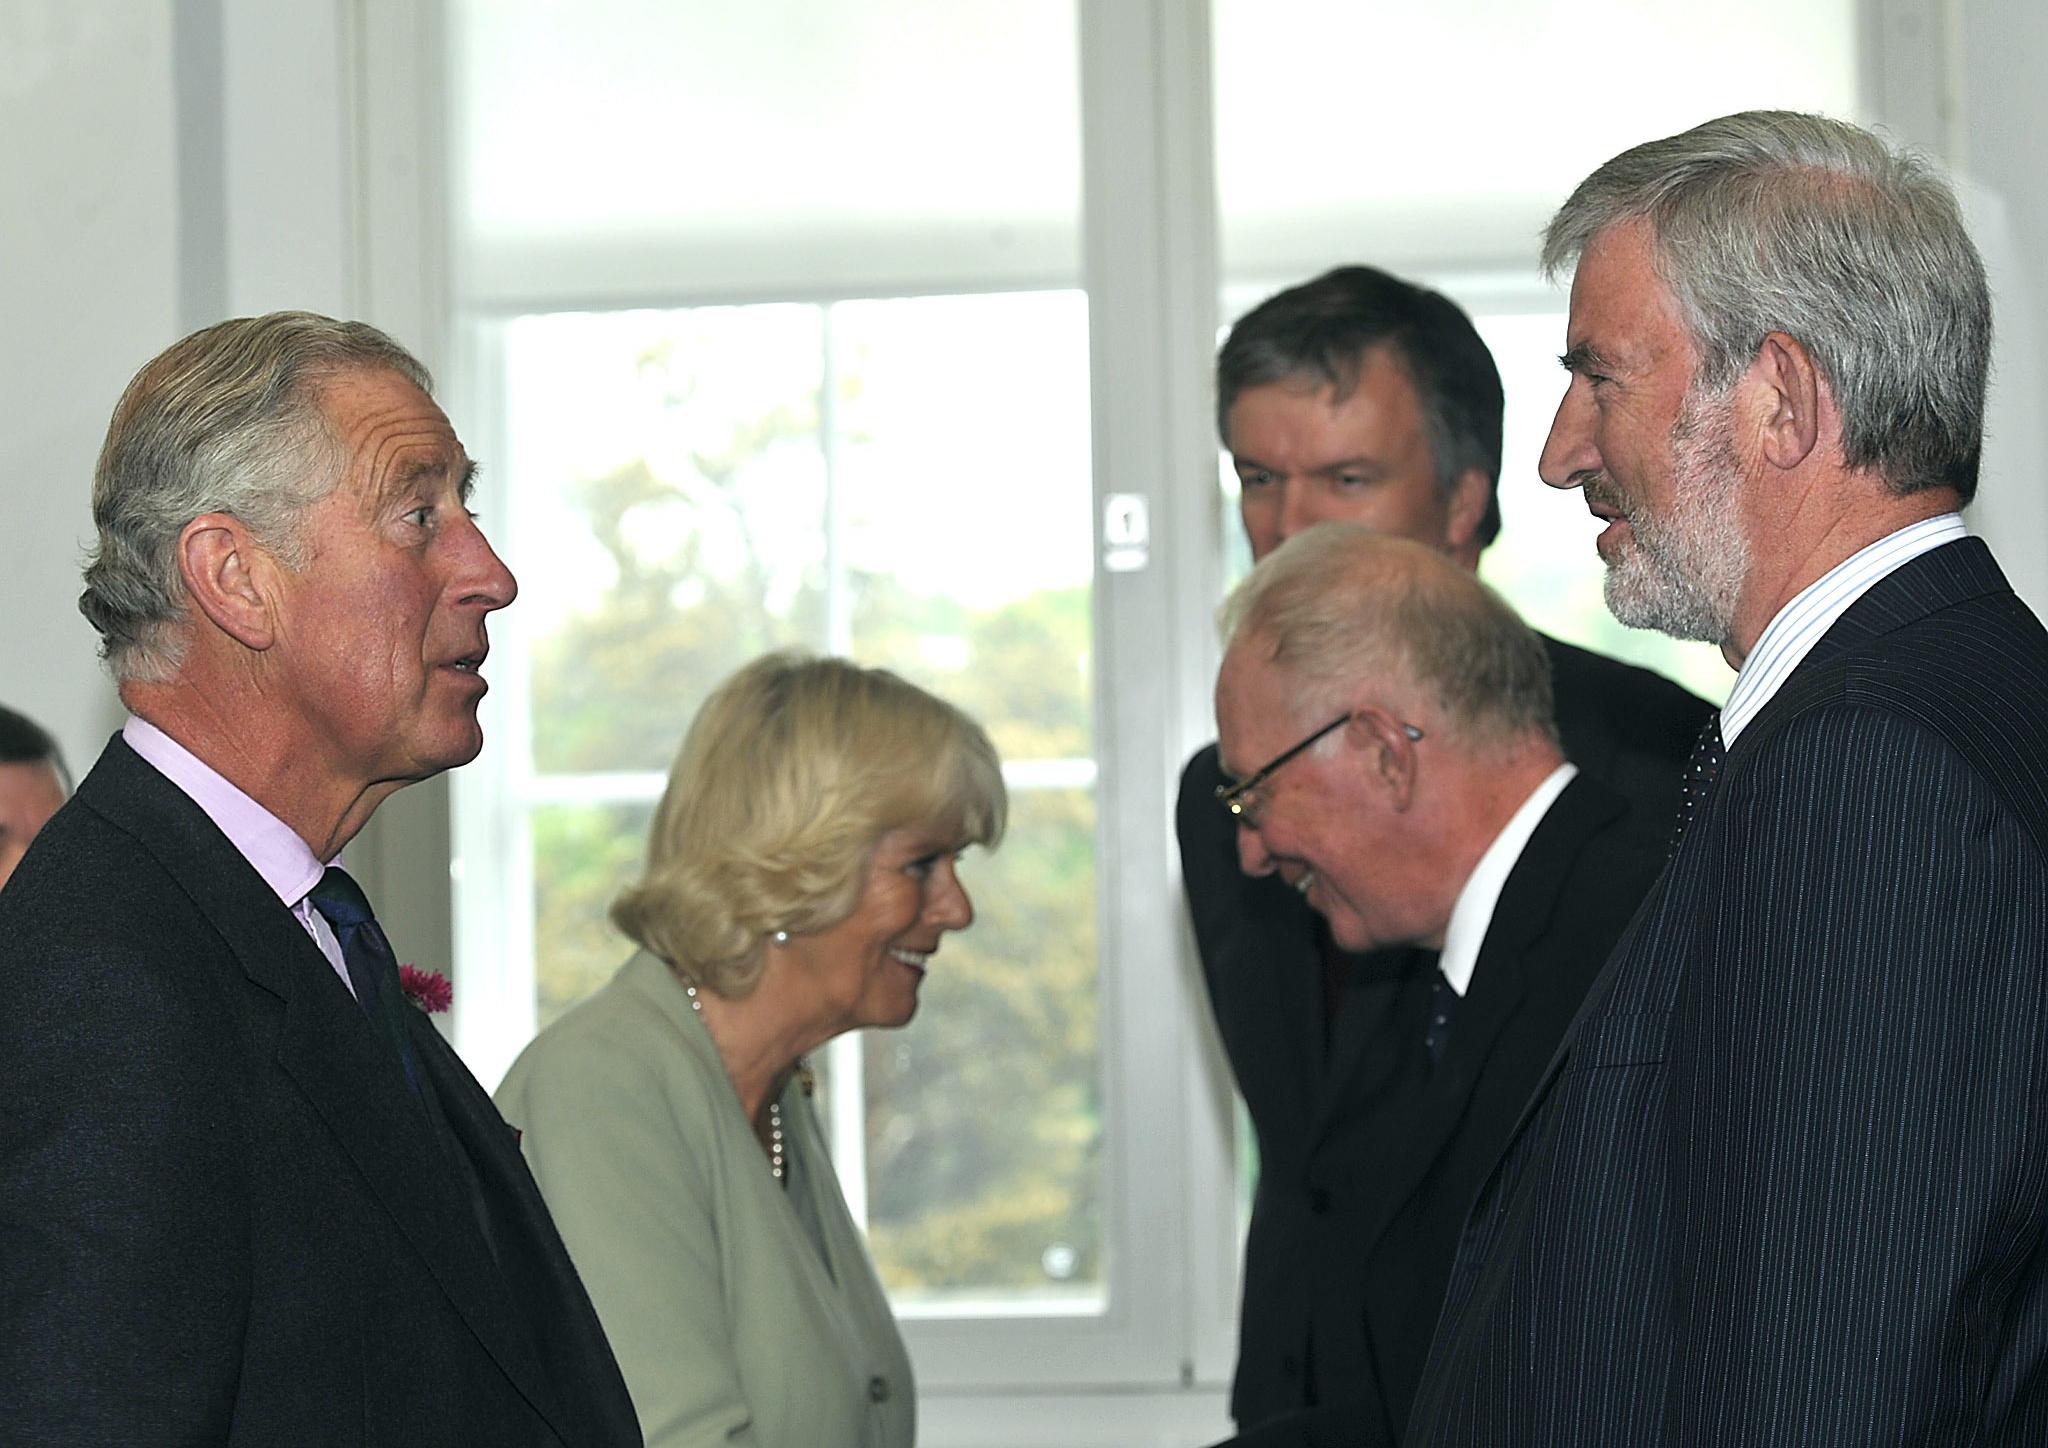 The Duke and Duchess of Rothesay at the School of Textiles and Design, Heriot Watt University, Galashiels, in 2013.